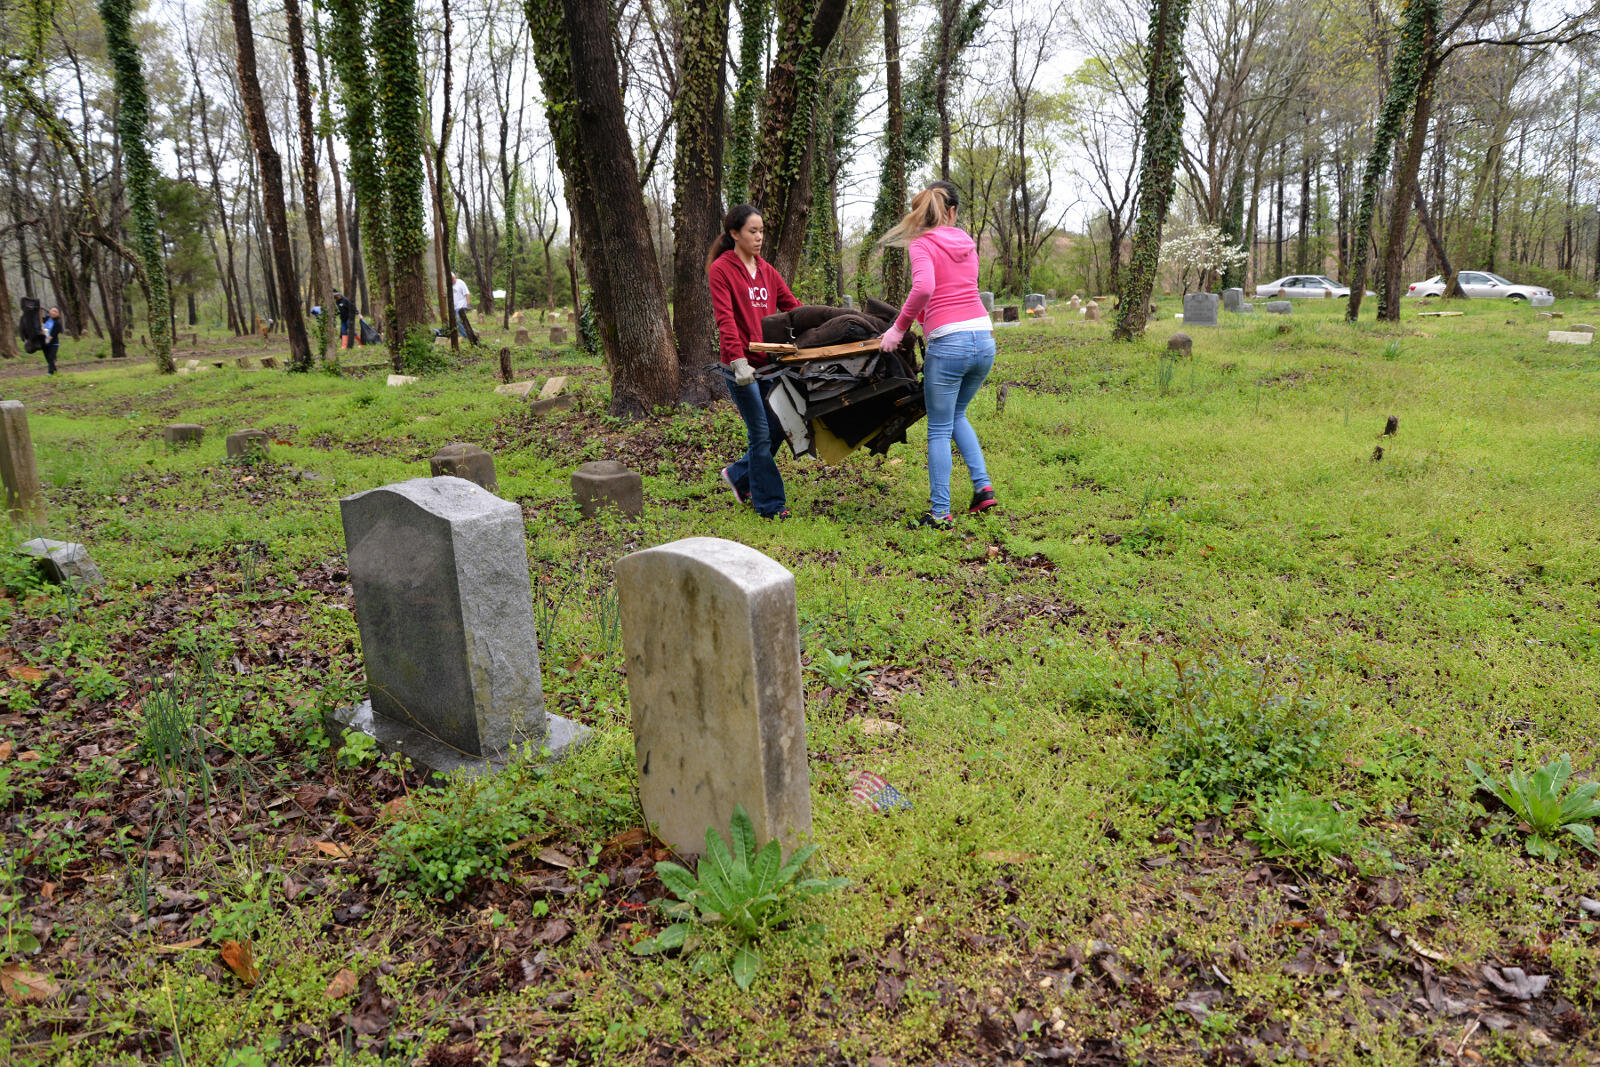 Alexis Meijias, a junior sociology major, and Victoria Mills, a senior science major, carry out trash from East End Cemetery.